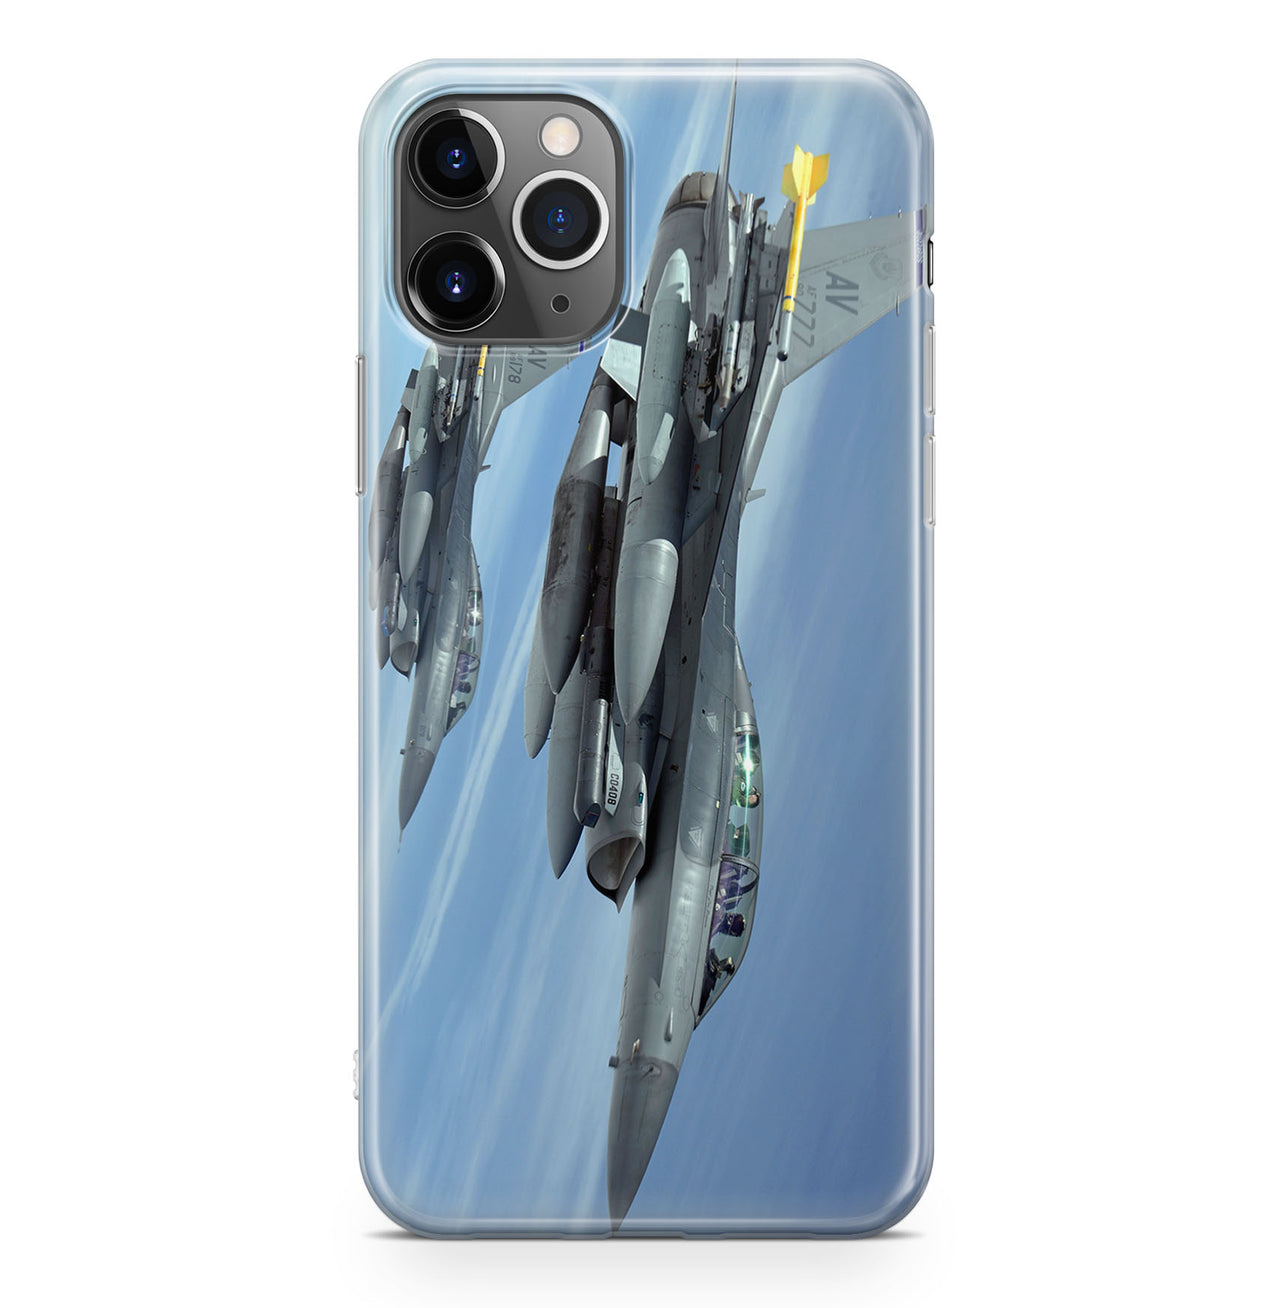 Two Fighting Falcon Designed iPhone Cases